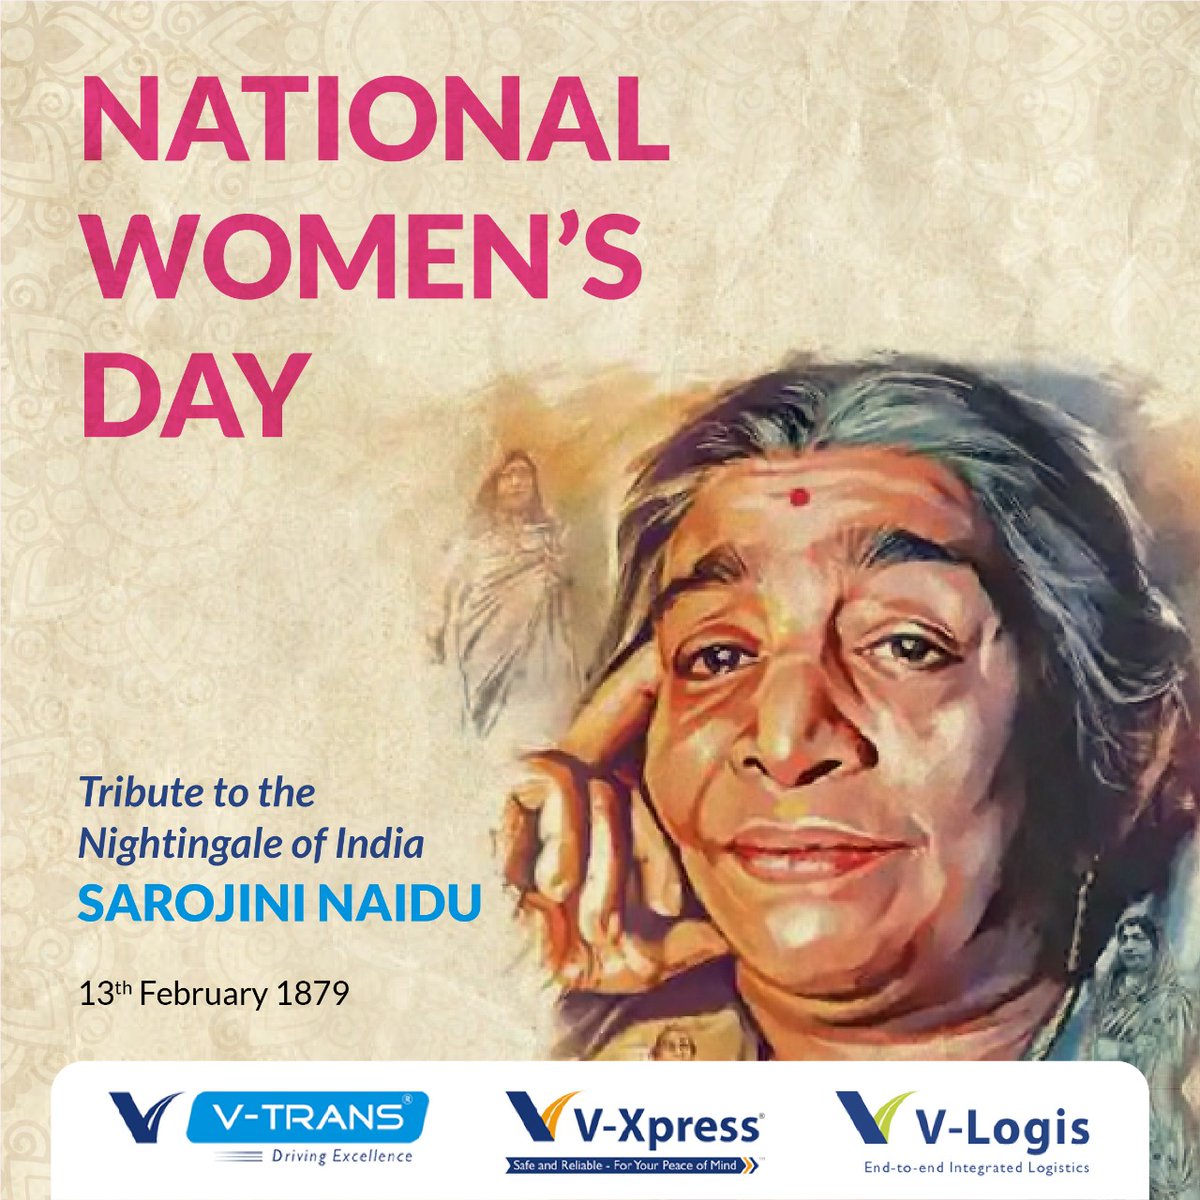 V Xpress On Twitter Remembering One The Renowned Freedom Fighter And Poetess Who Contributed Immensely To The Upliftment Of Women As She Has Been And Will Always Be A True Inspiration To Women Hood